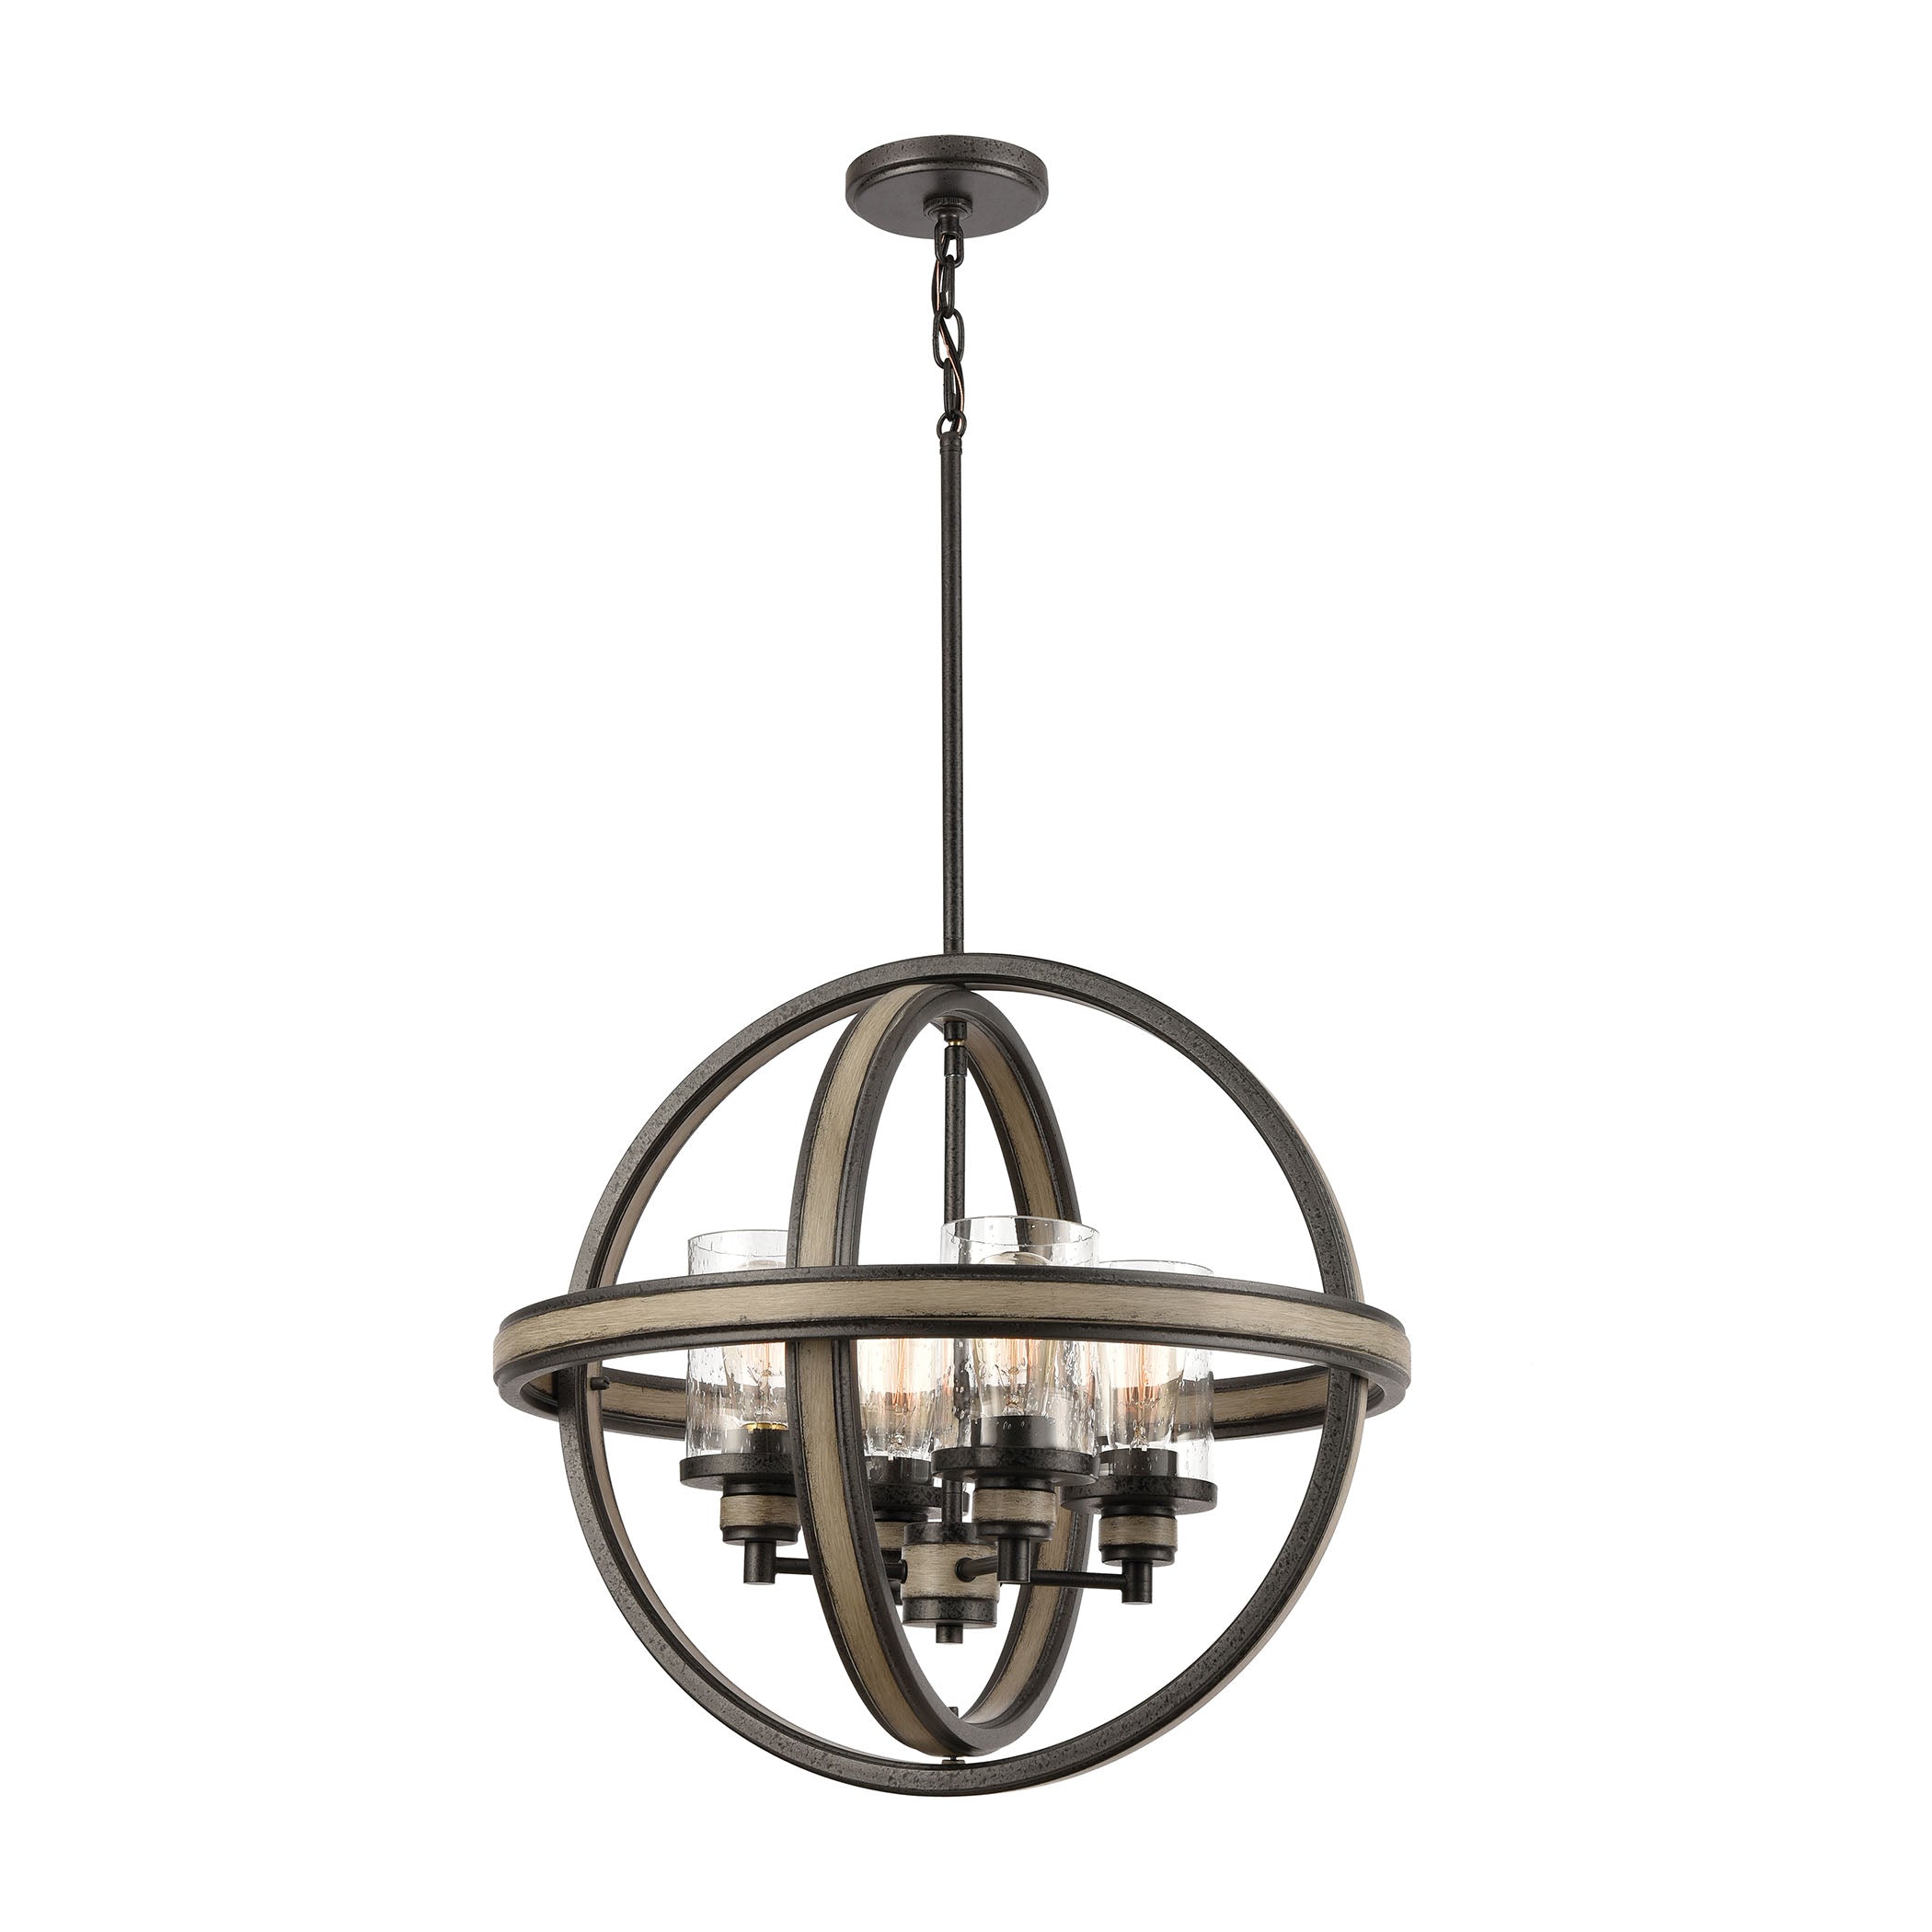 ELK Lighting 89158/4 Beaufort 4-Light Chandelier in Anvil Iron and Distressed Antique Graywood with Seedy Glass